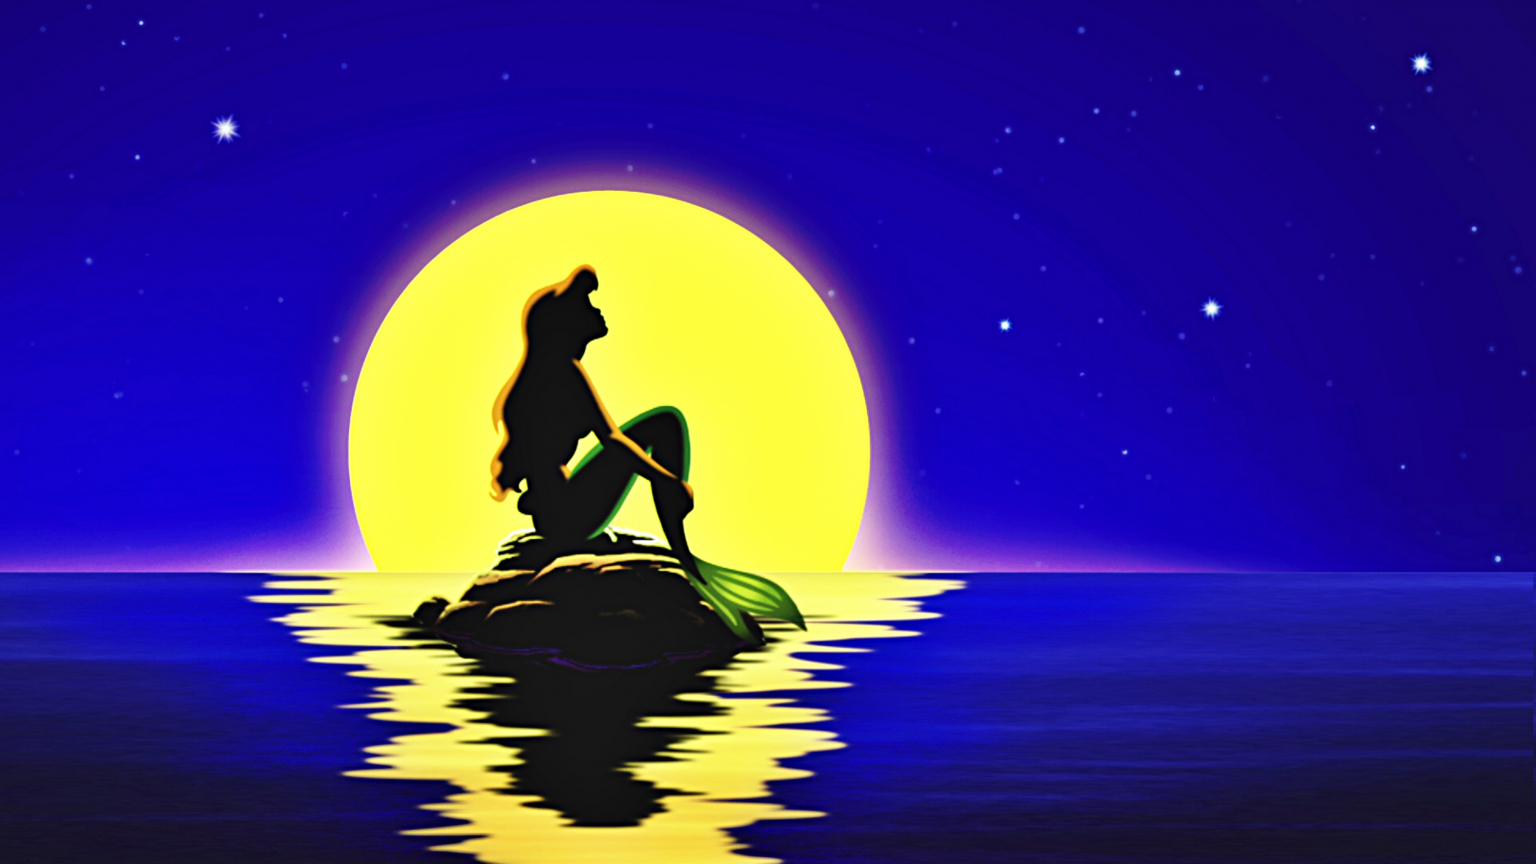 Little Mermaid Quotes Wallpapers